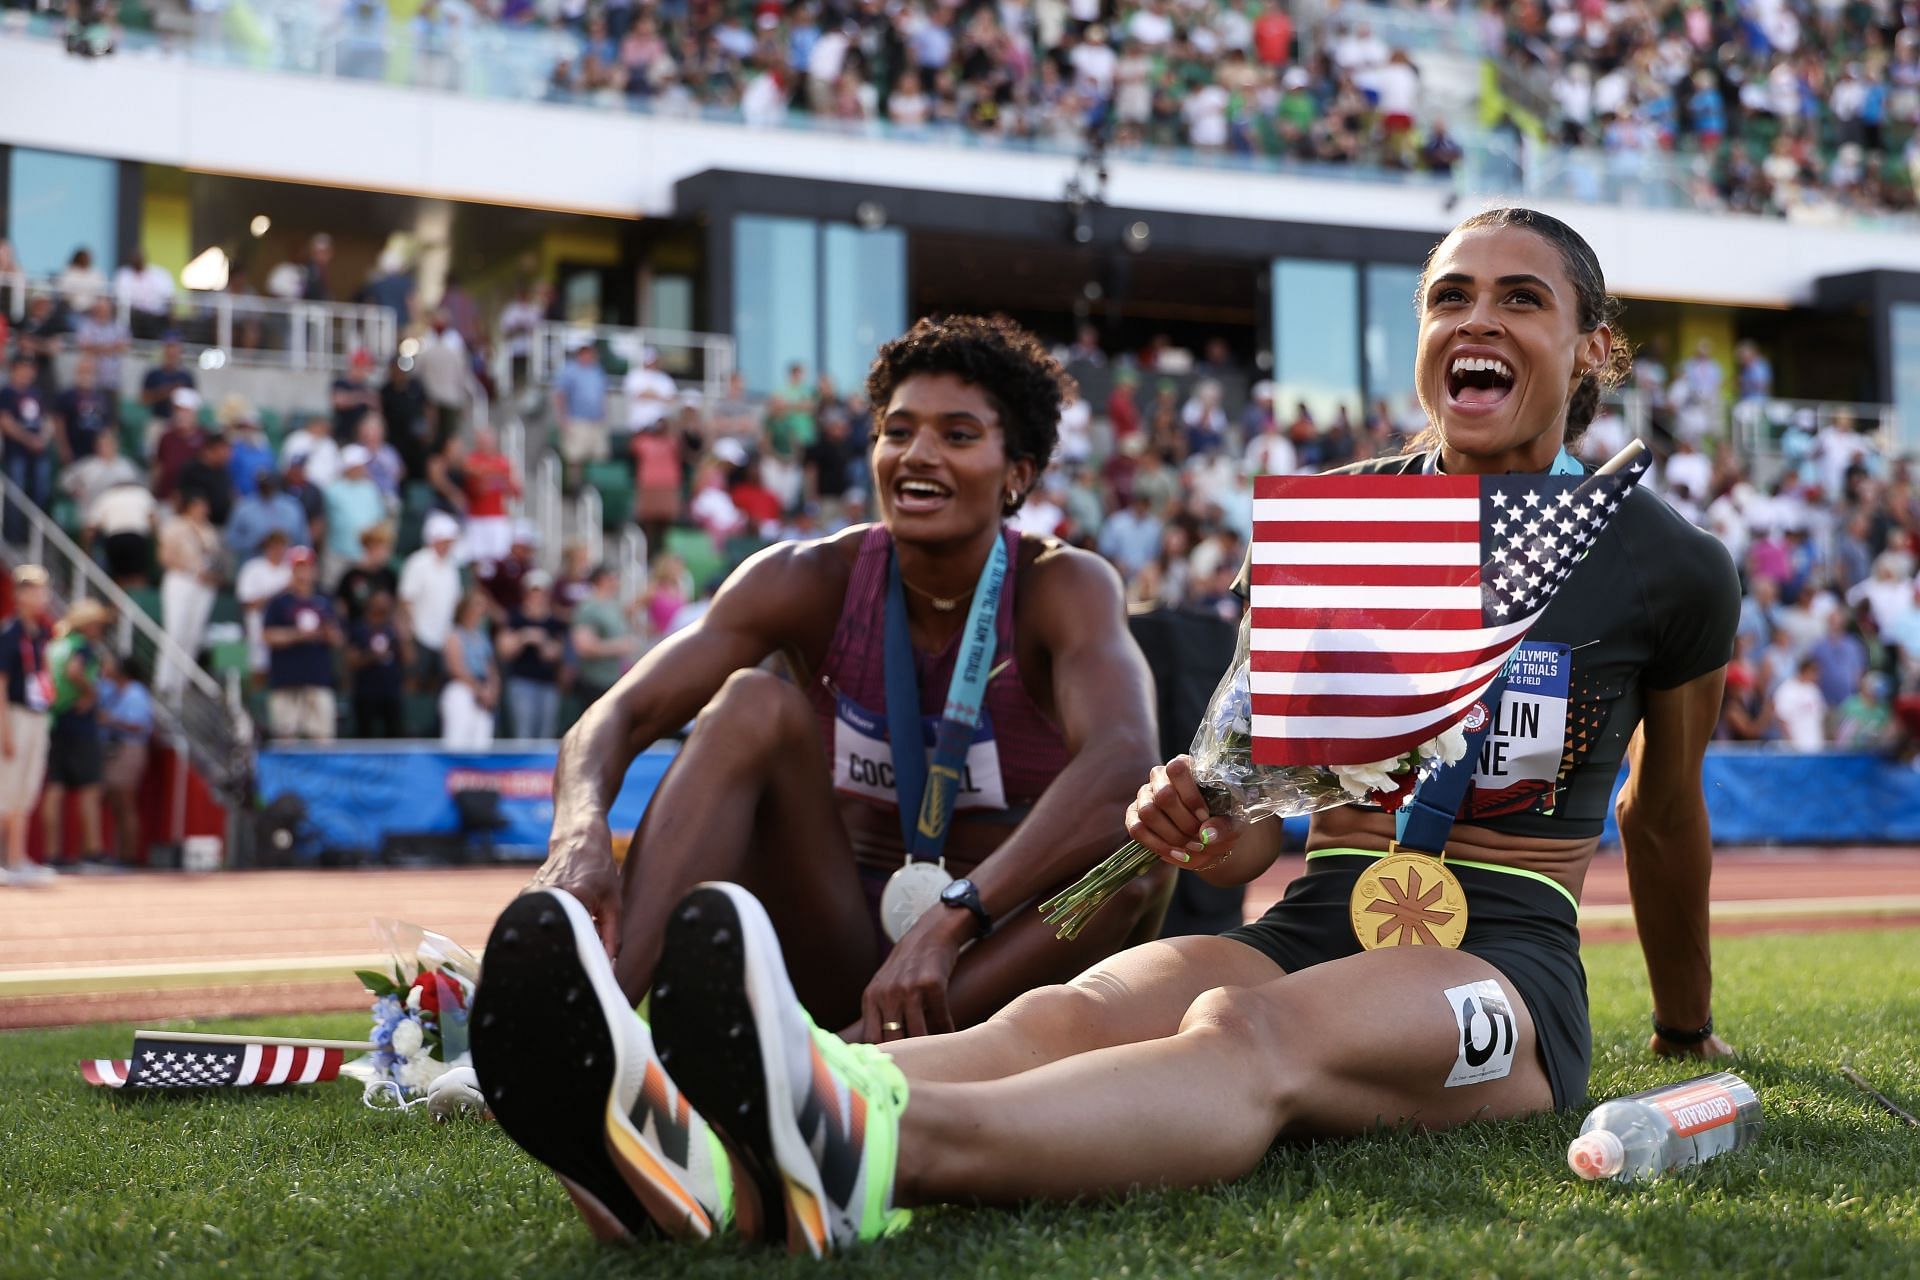 Sydney McLaughlin-Levrone and Anna Cockrell relaxing after the race